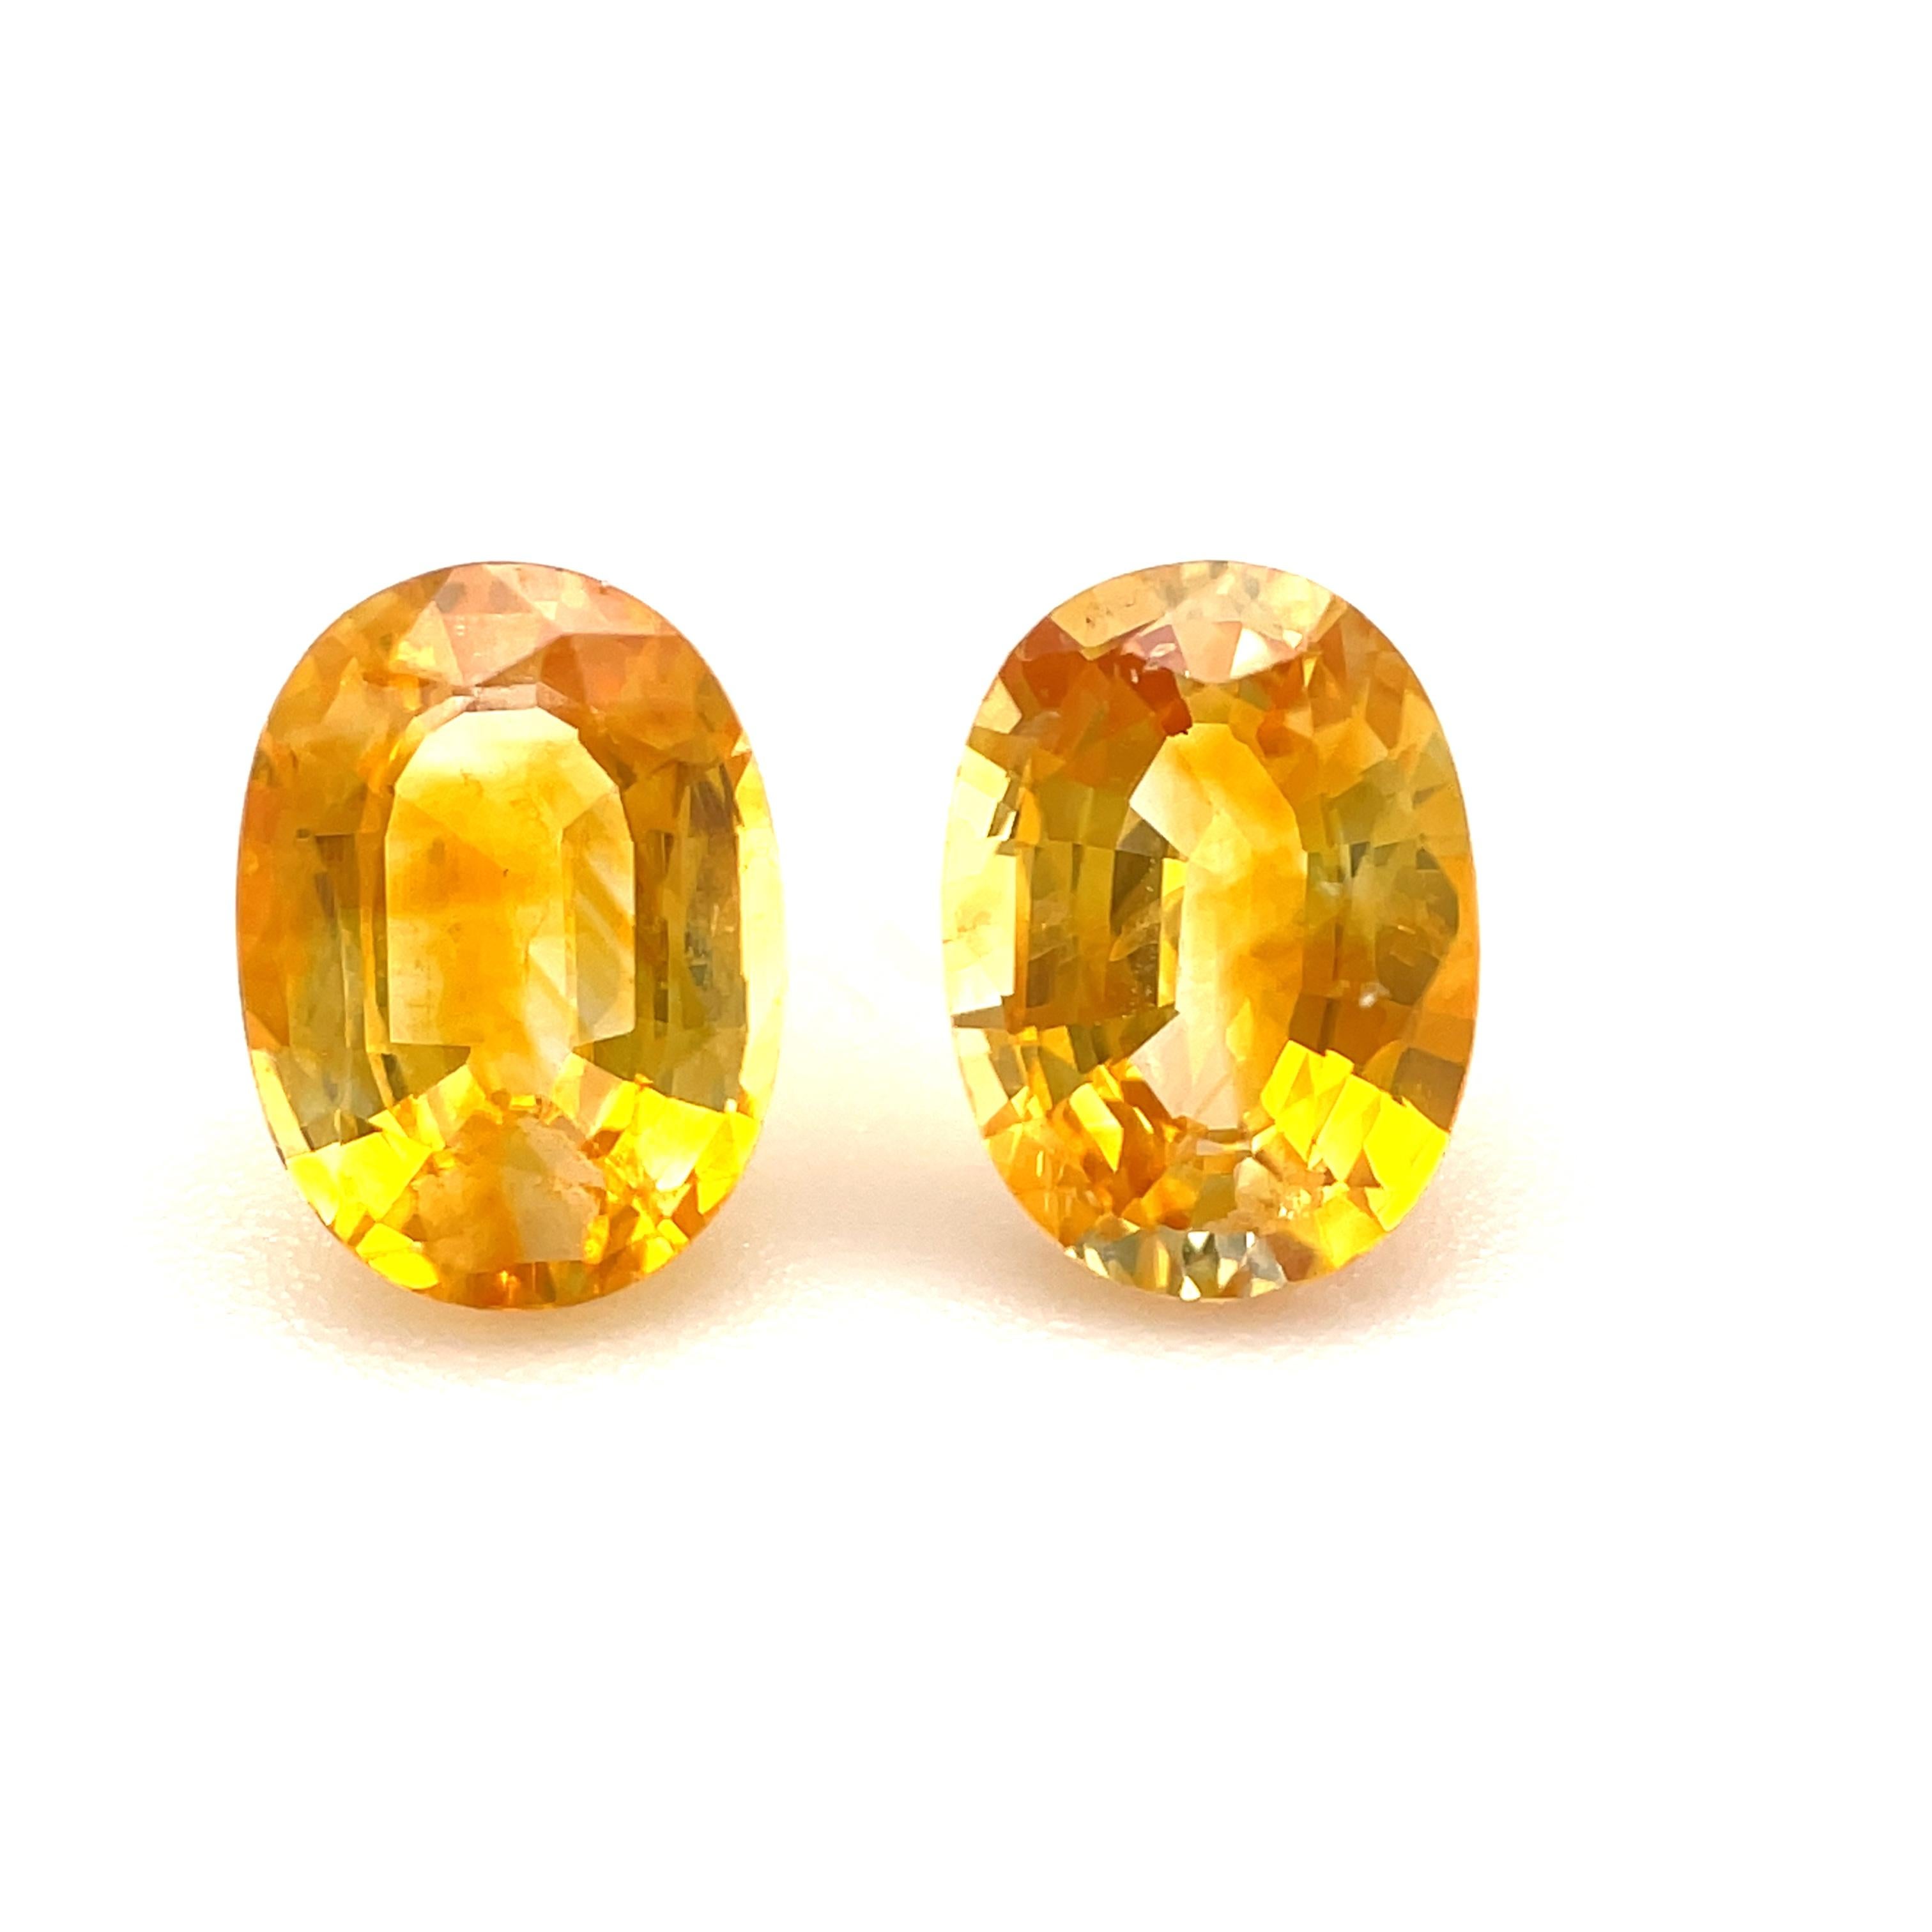 1.92 Carat Total Oval Yellow Sapphire Pair for Earrings, Loose Gemstones In New Condition For Sale In Los Angeles, CA